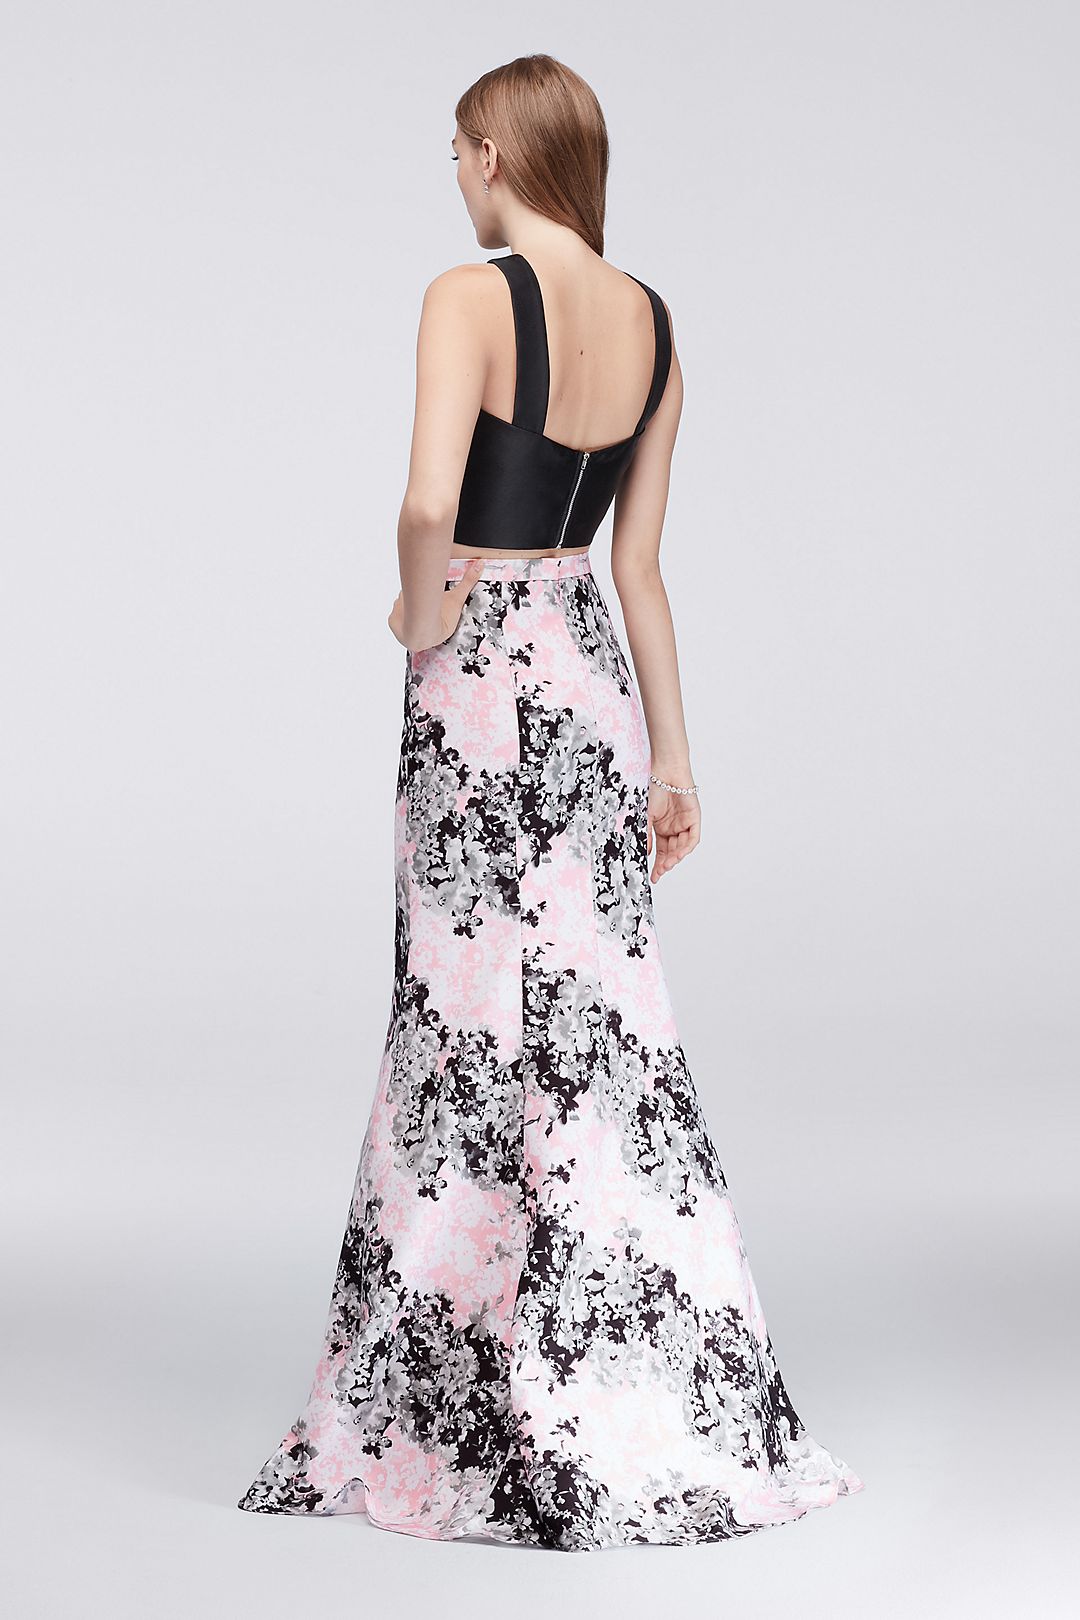 Cutaway Top and Floral Twill Two-Piece Dress Image 2